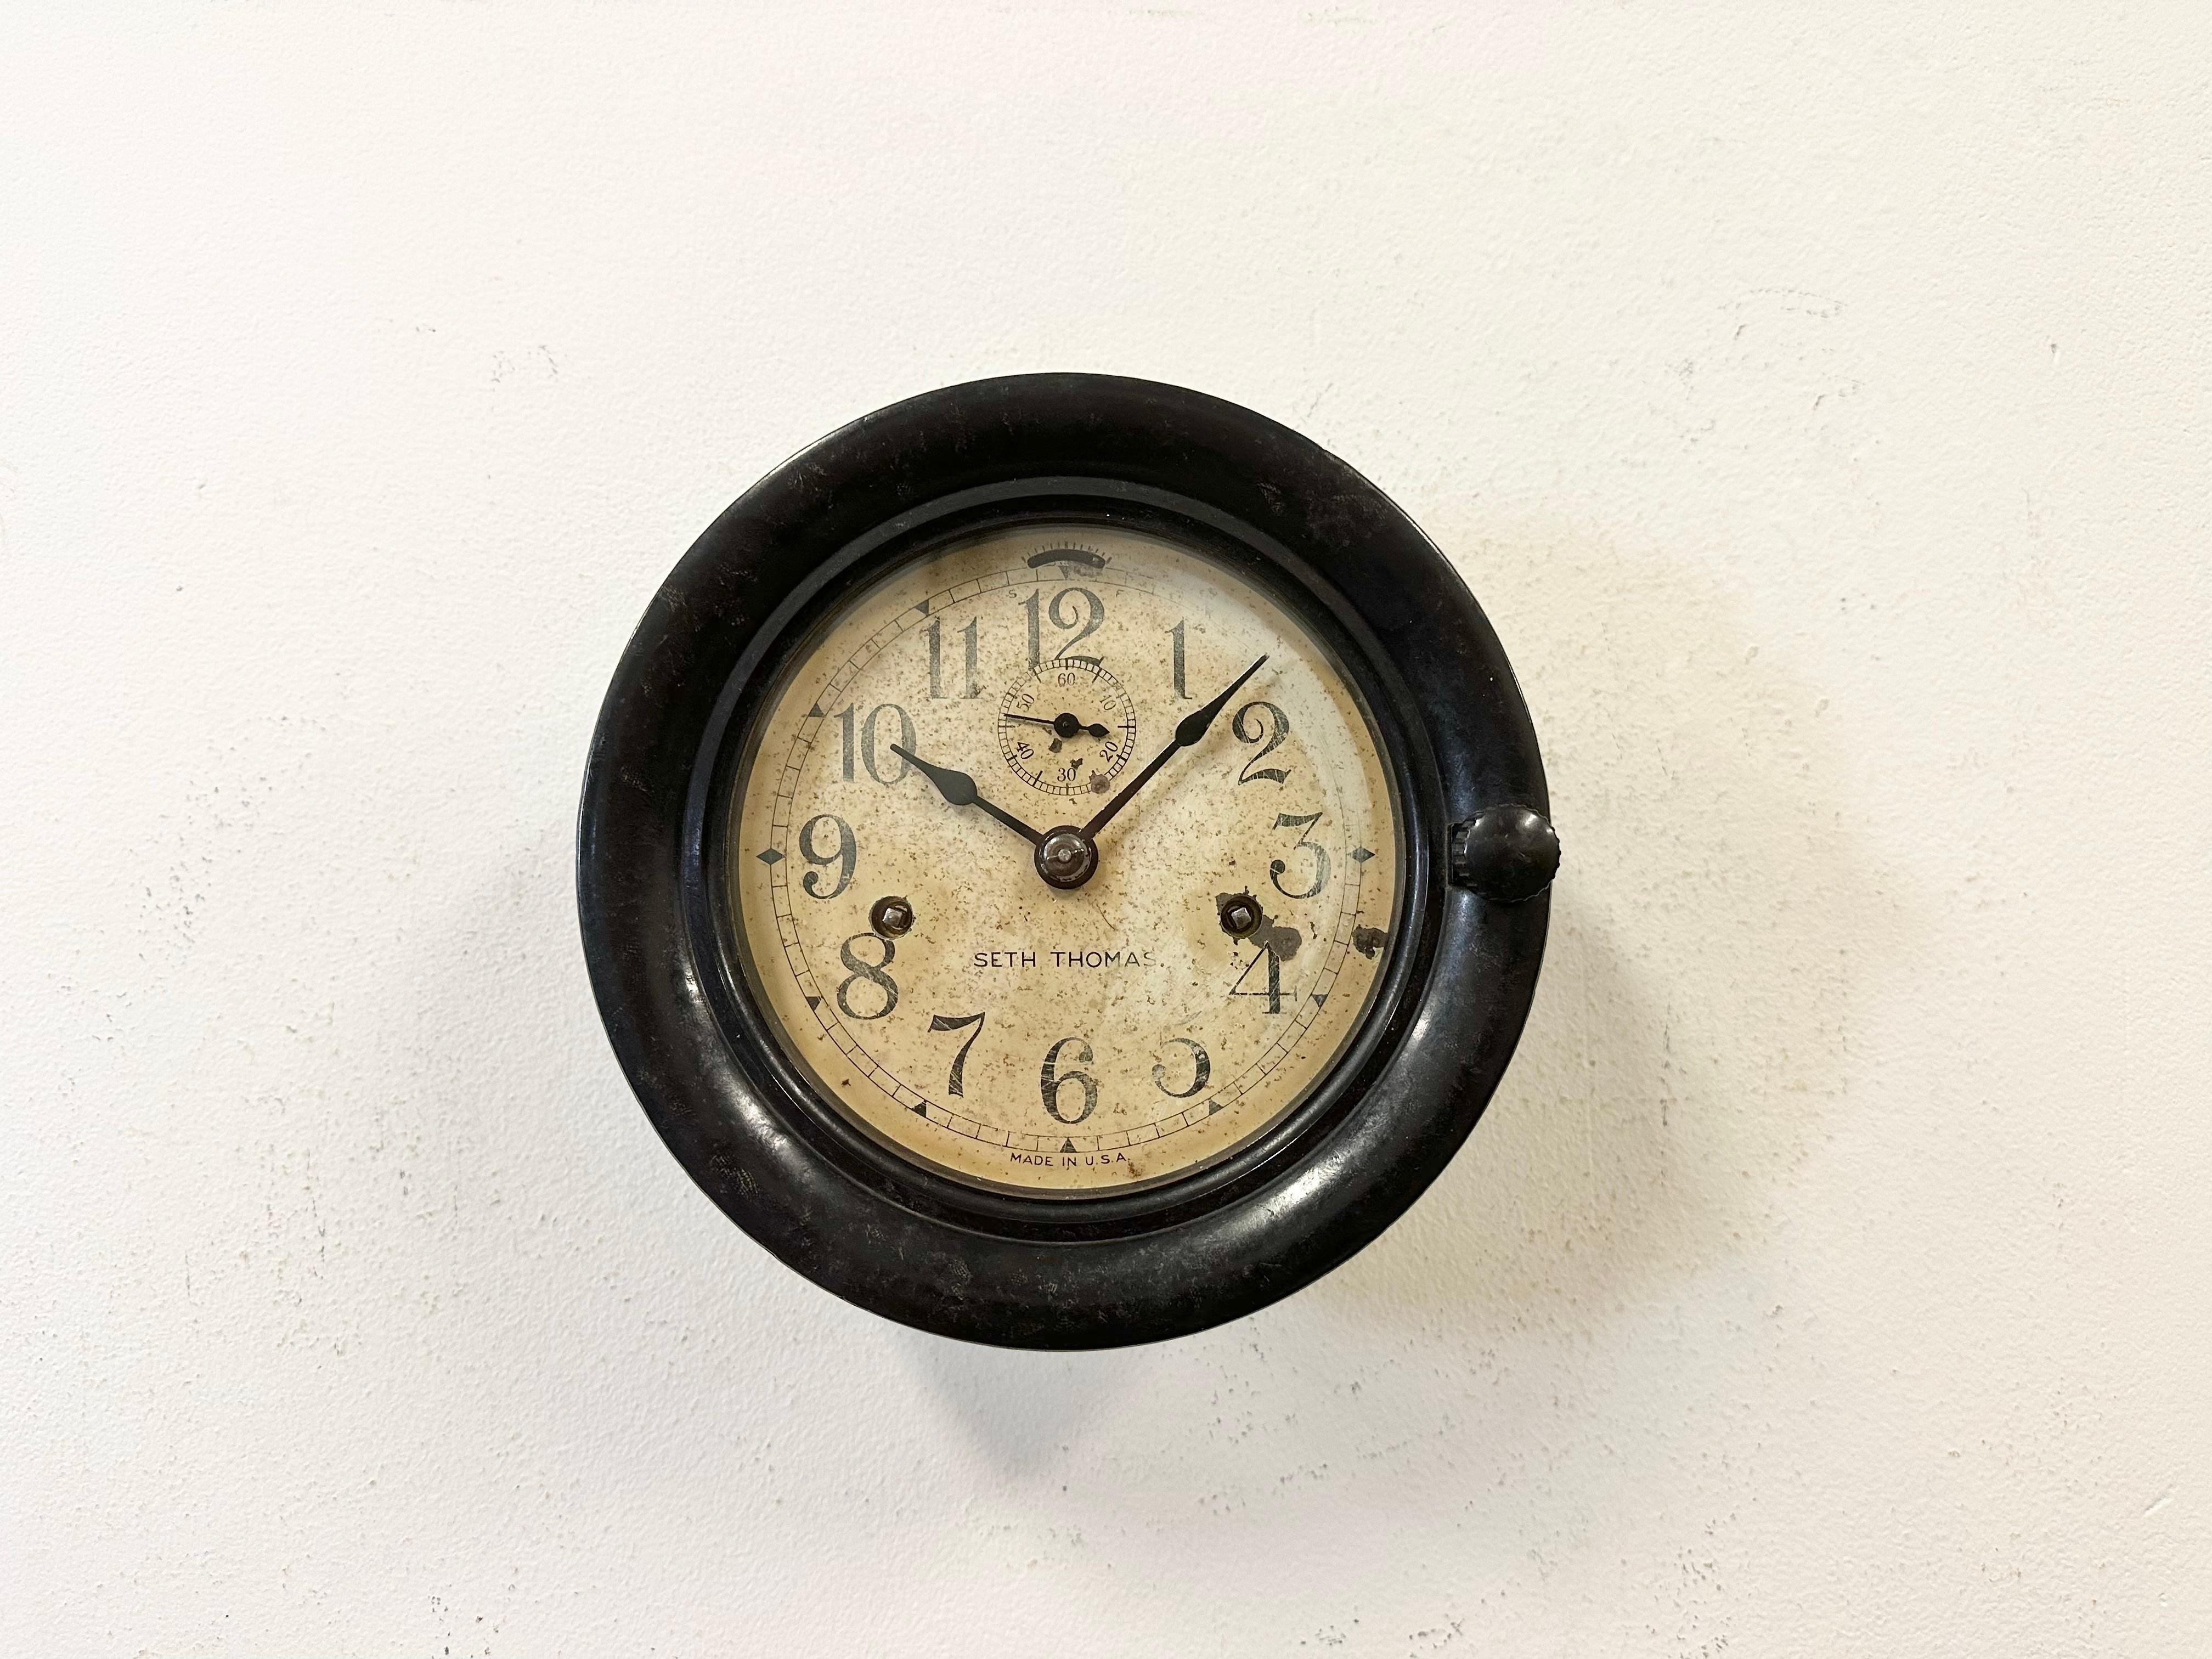 Vintage bakelite winding ships wall clock made by Seth Thomas Clock Company in United States during the 1950s .It features a dark brown bakelite case and a clear glass cover. The original mechanic movement works perfectly. Key included. 
The